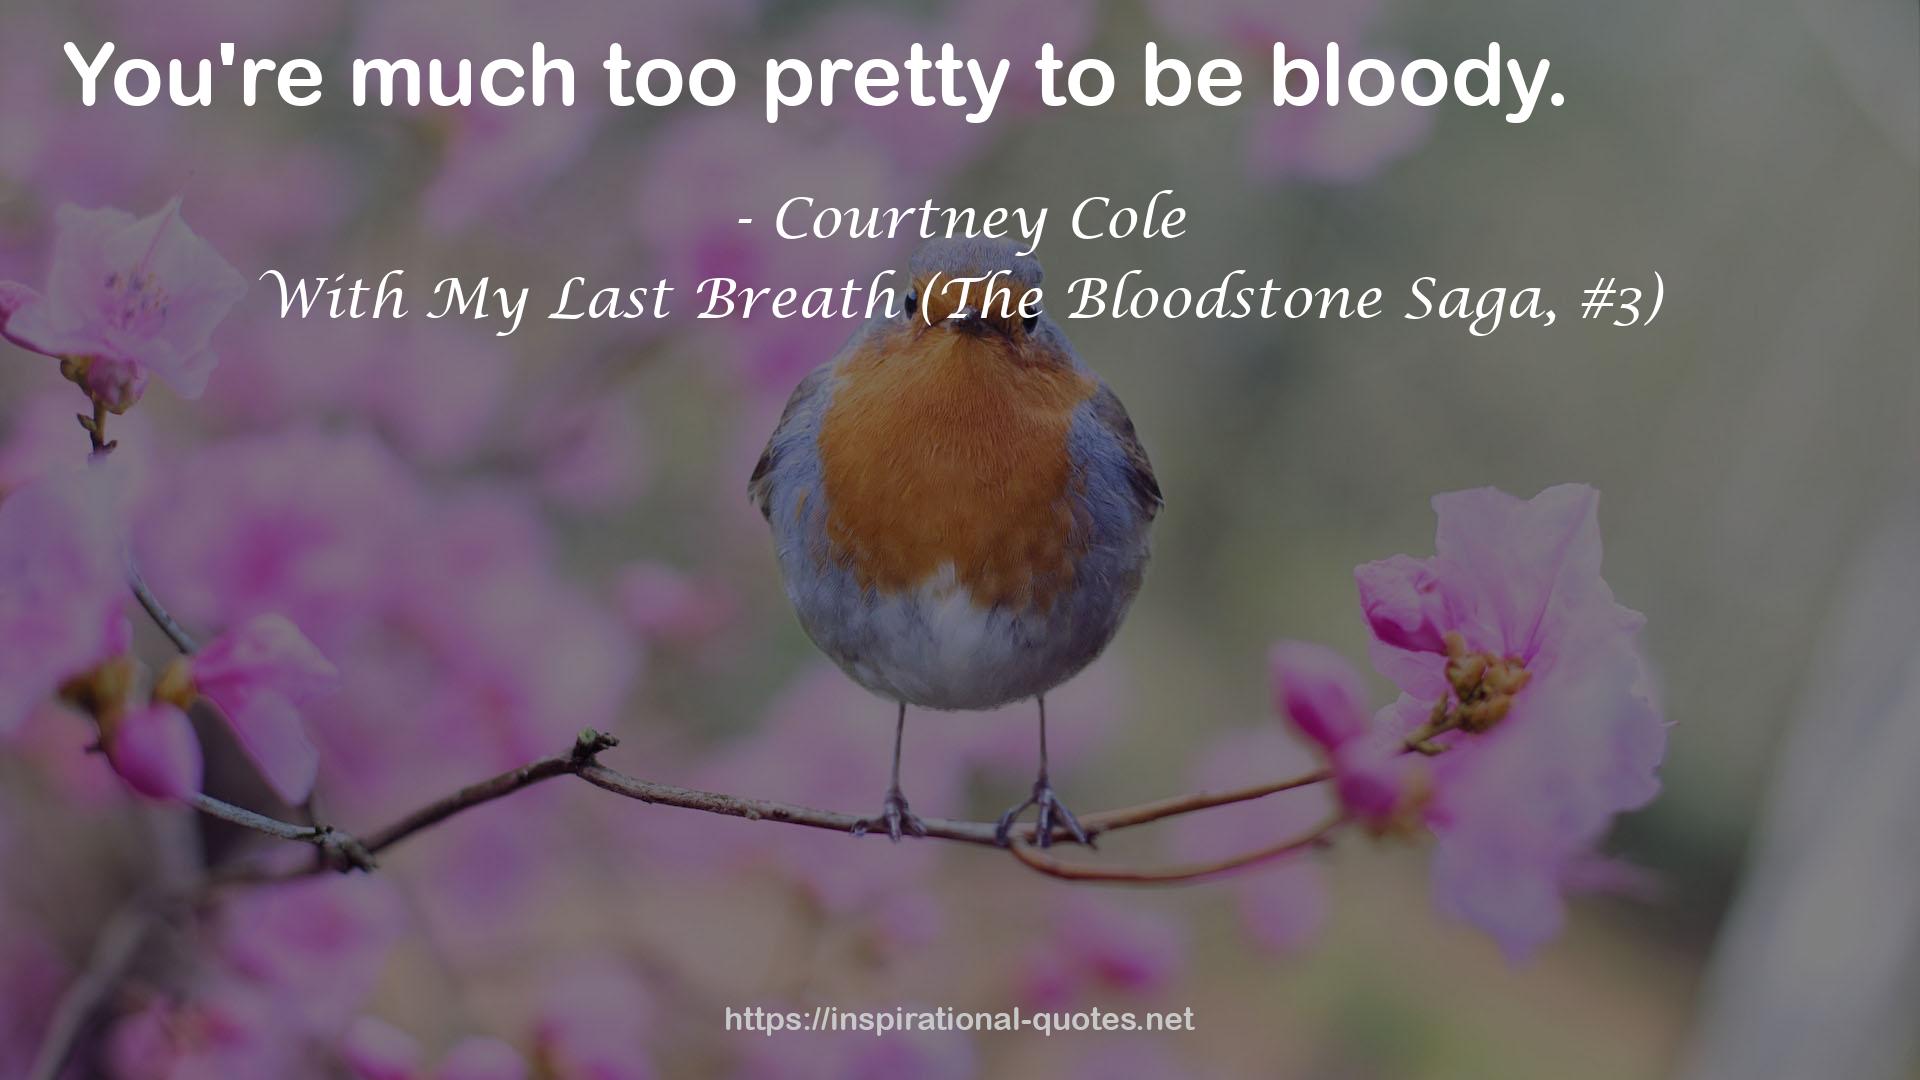 With My Last Breath (The Bloodstone Saga, #3) QUOTES